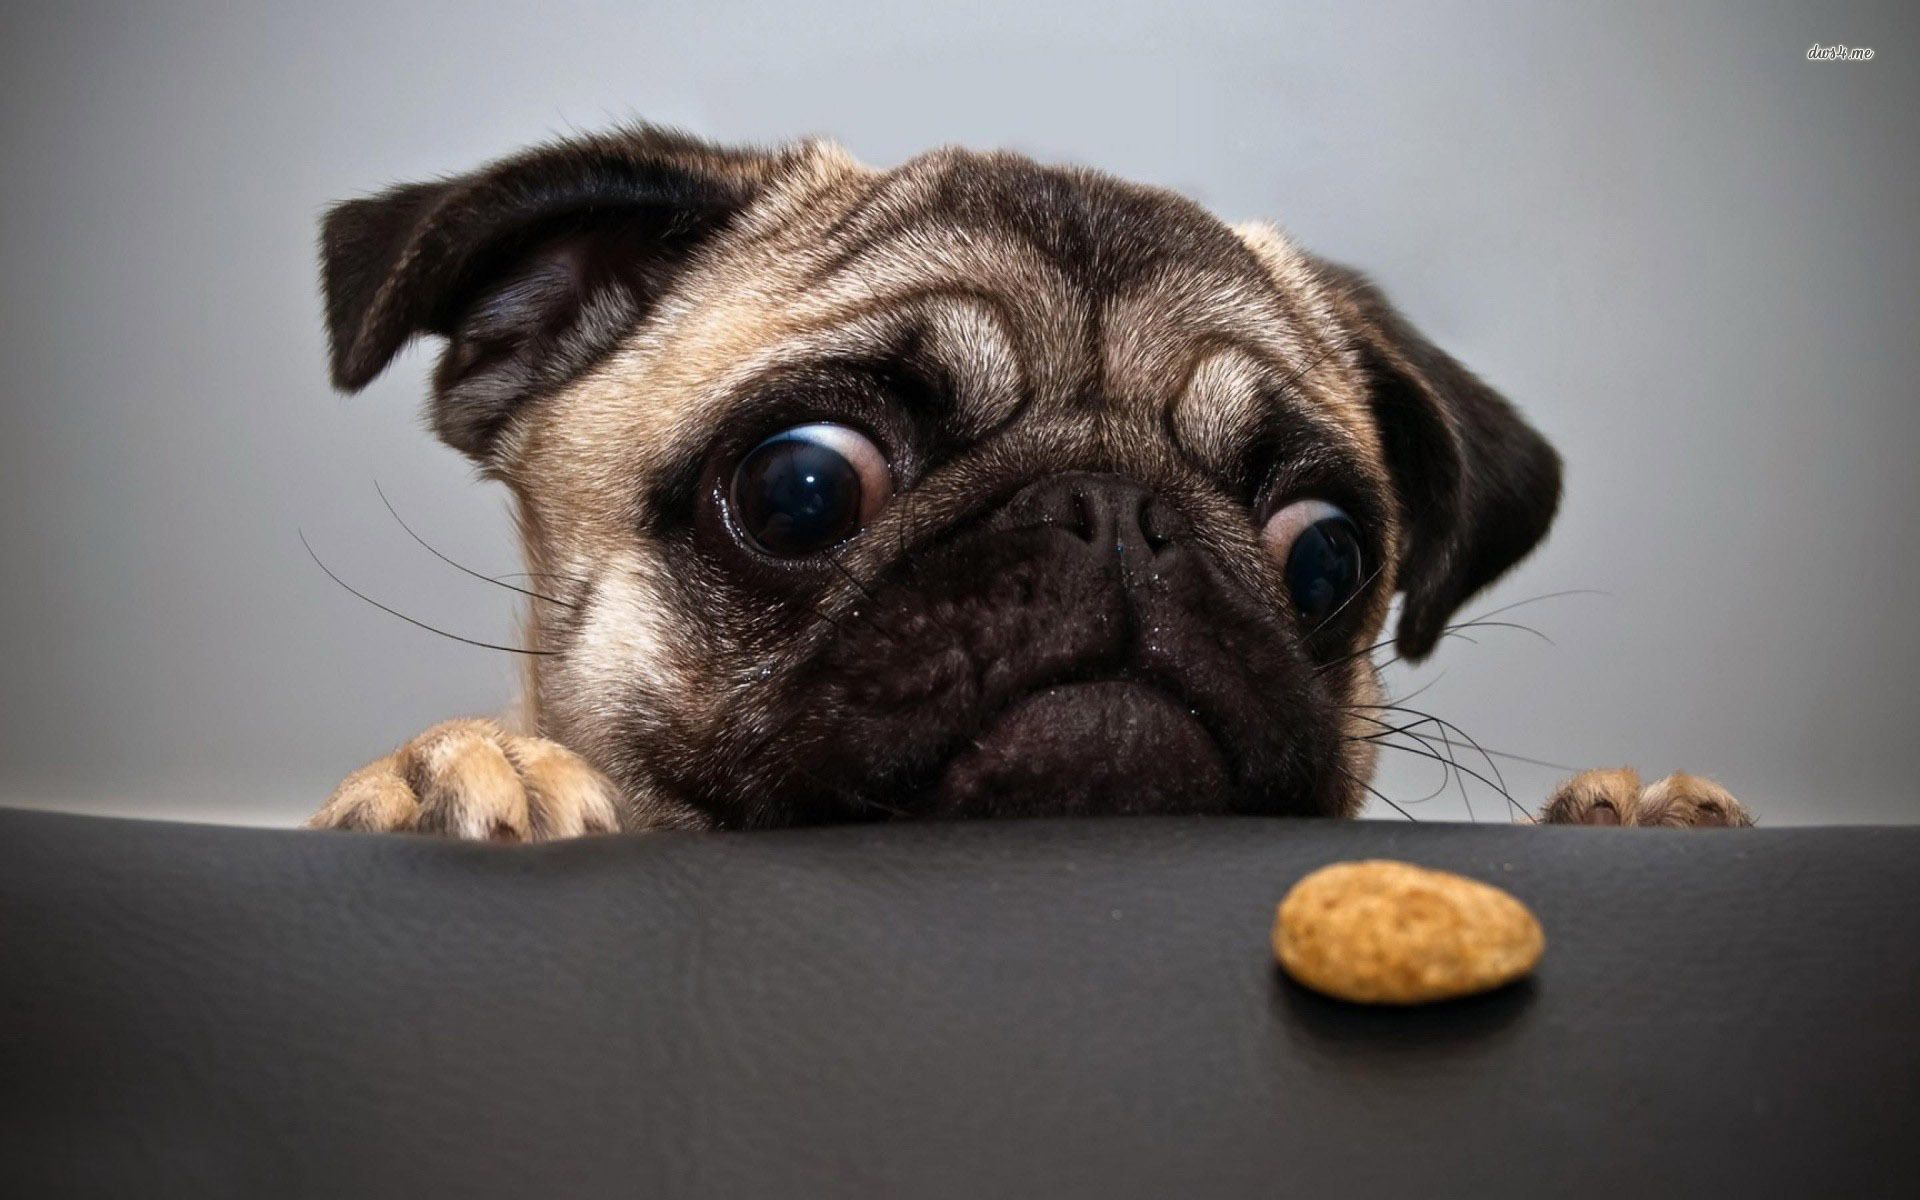 Pug wanting the cookie wallpaper - Animal wallpapers - #19833